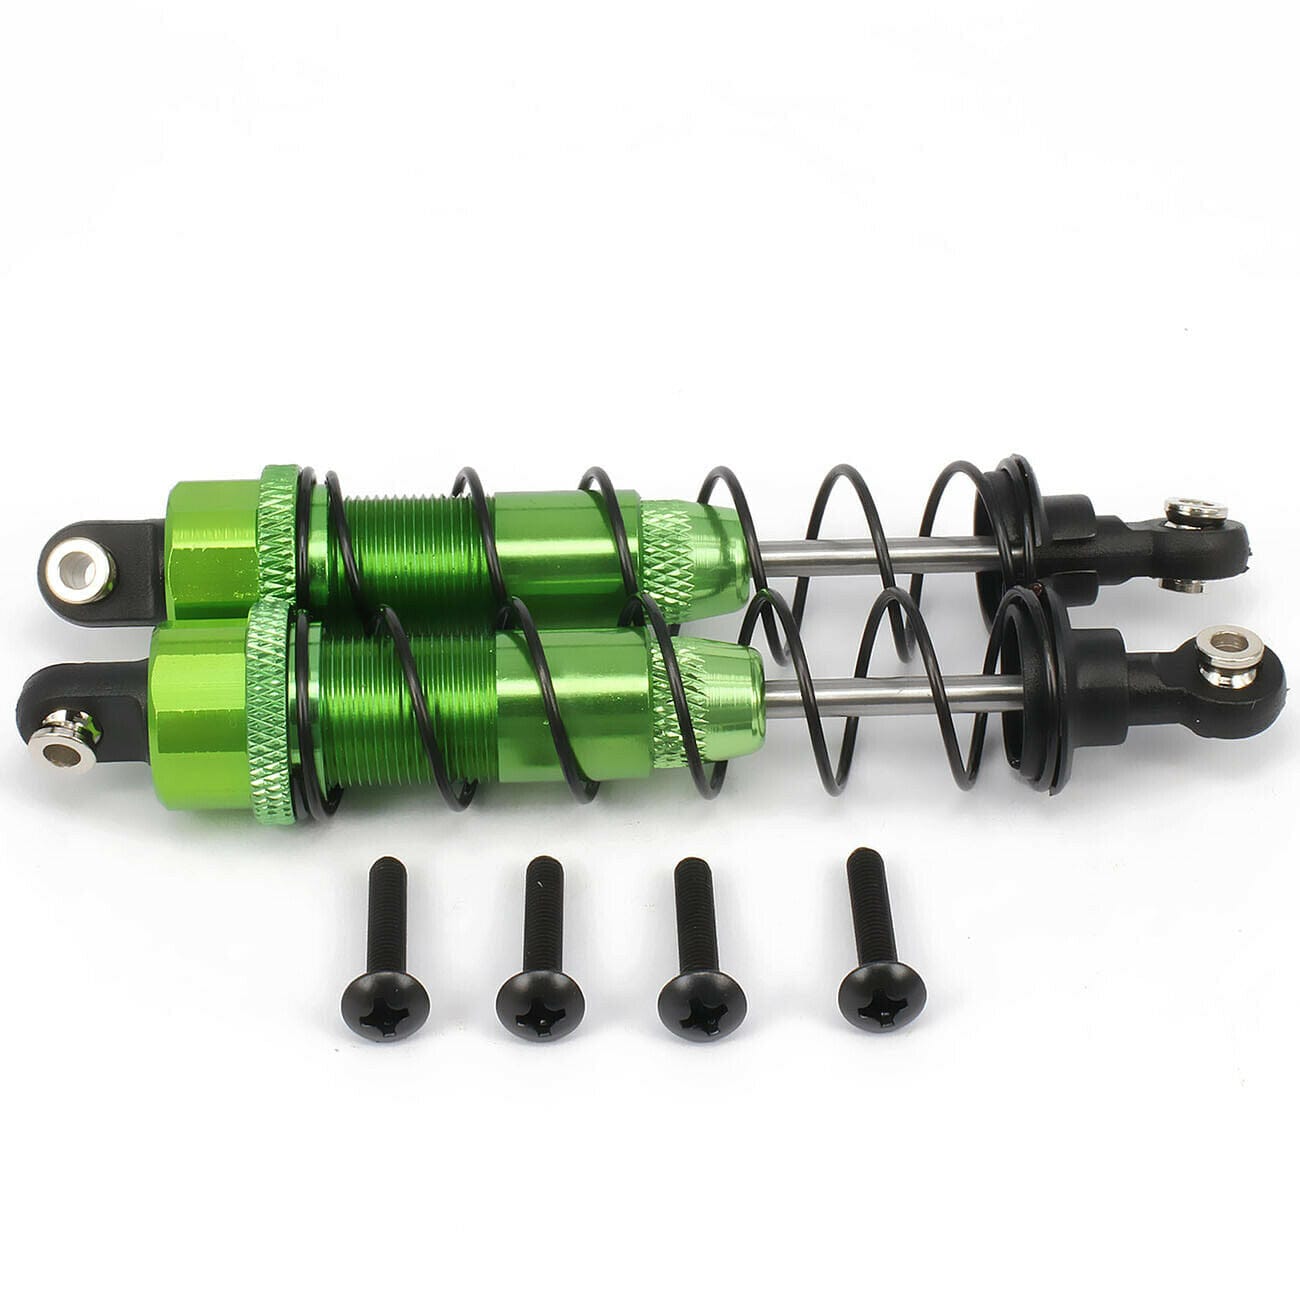 RCAWD AXIAL UPGRADE PARTS Green 100mm RC Shock Absorber Damper For Rc Model Car 1/10 Axial Scx10